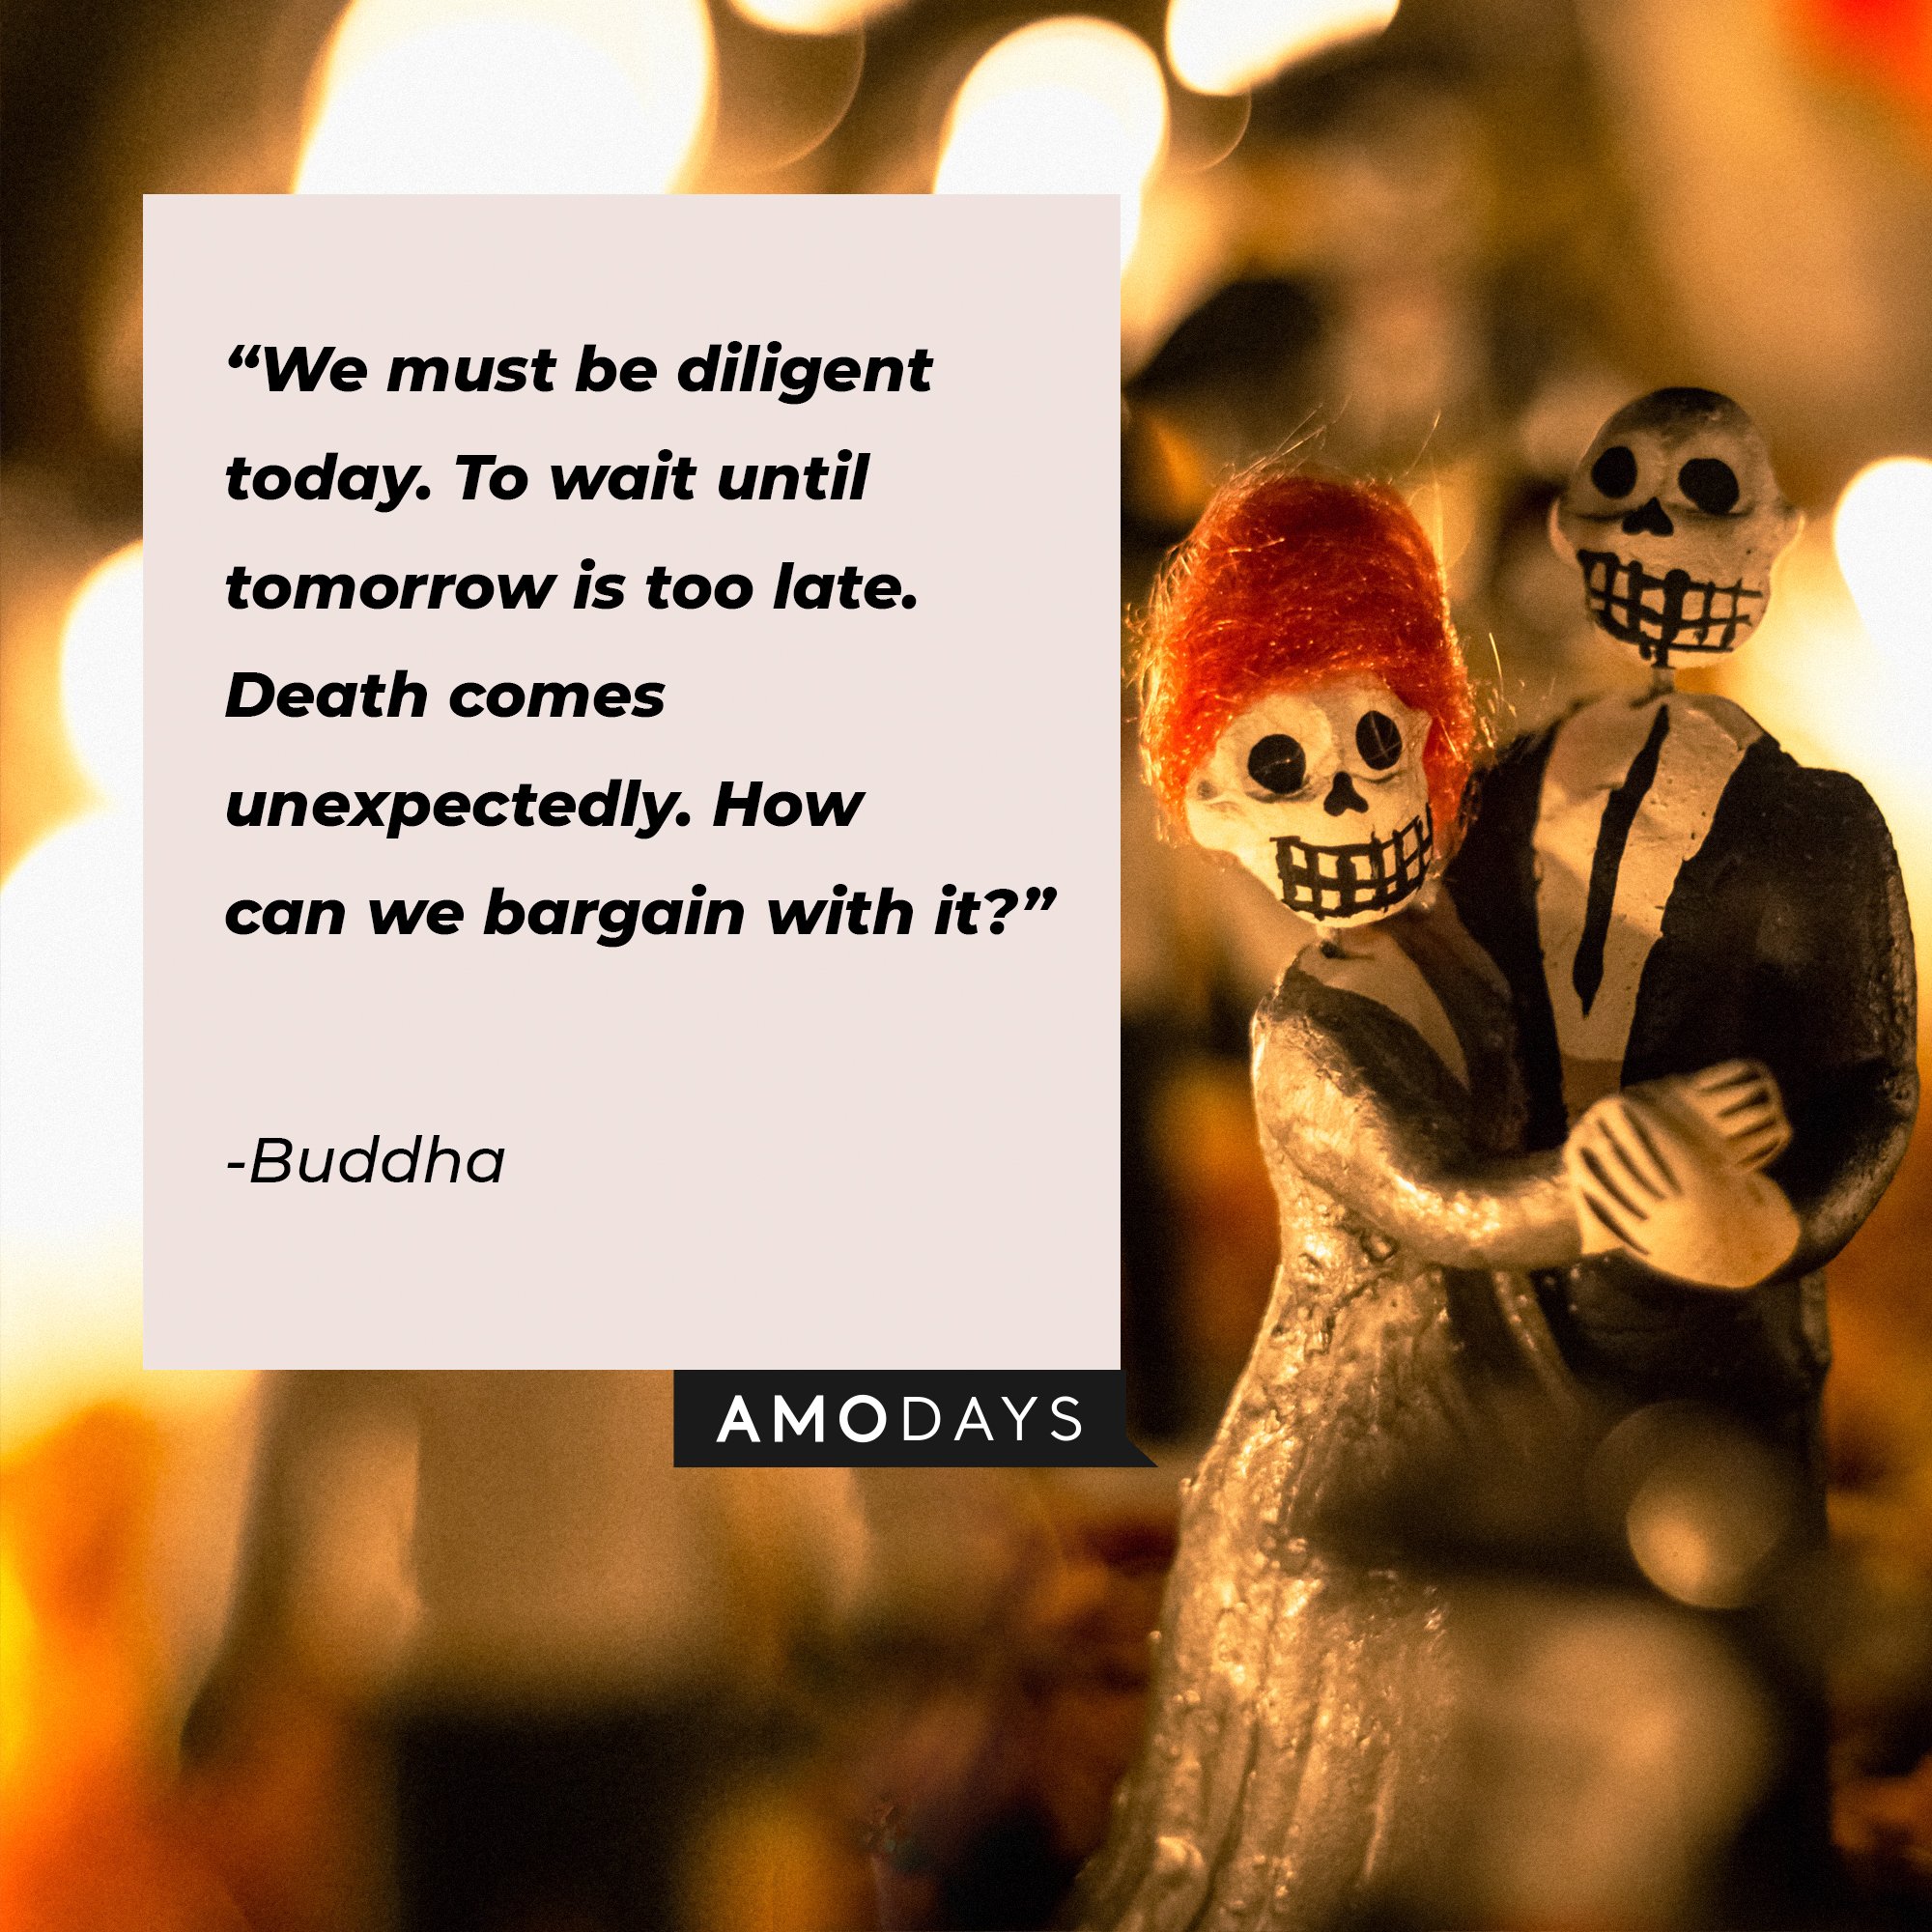 Buddha’s quote: "We must be diligent today. To wait until tomorrow is too late. Death comes unexpectedly. How can we bargain with it?" | Image: AmoDays  